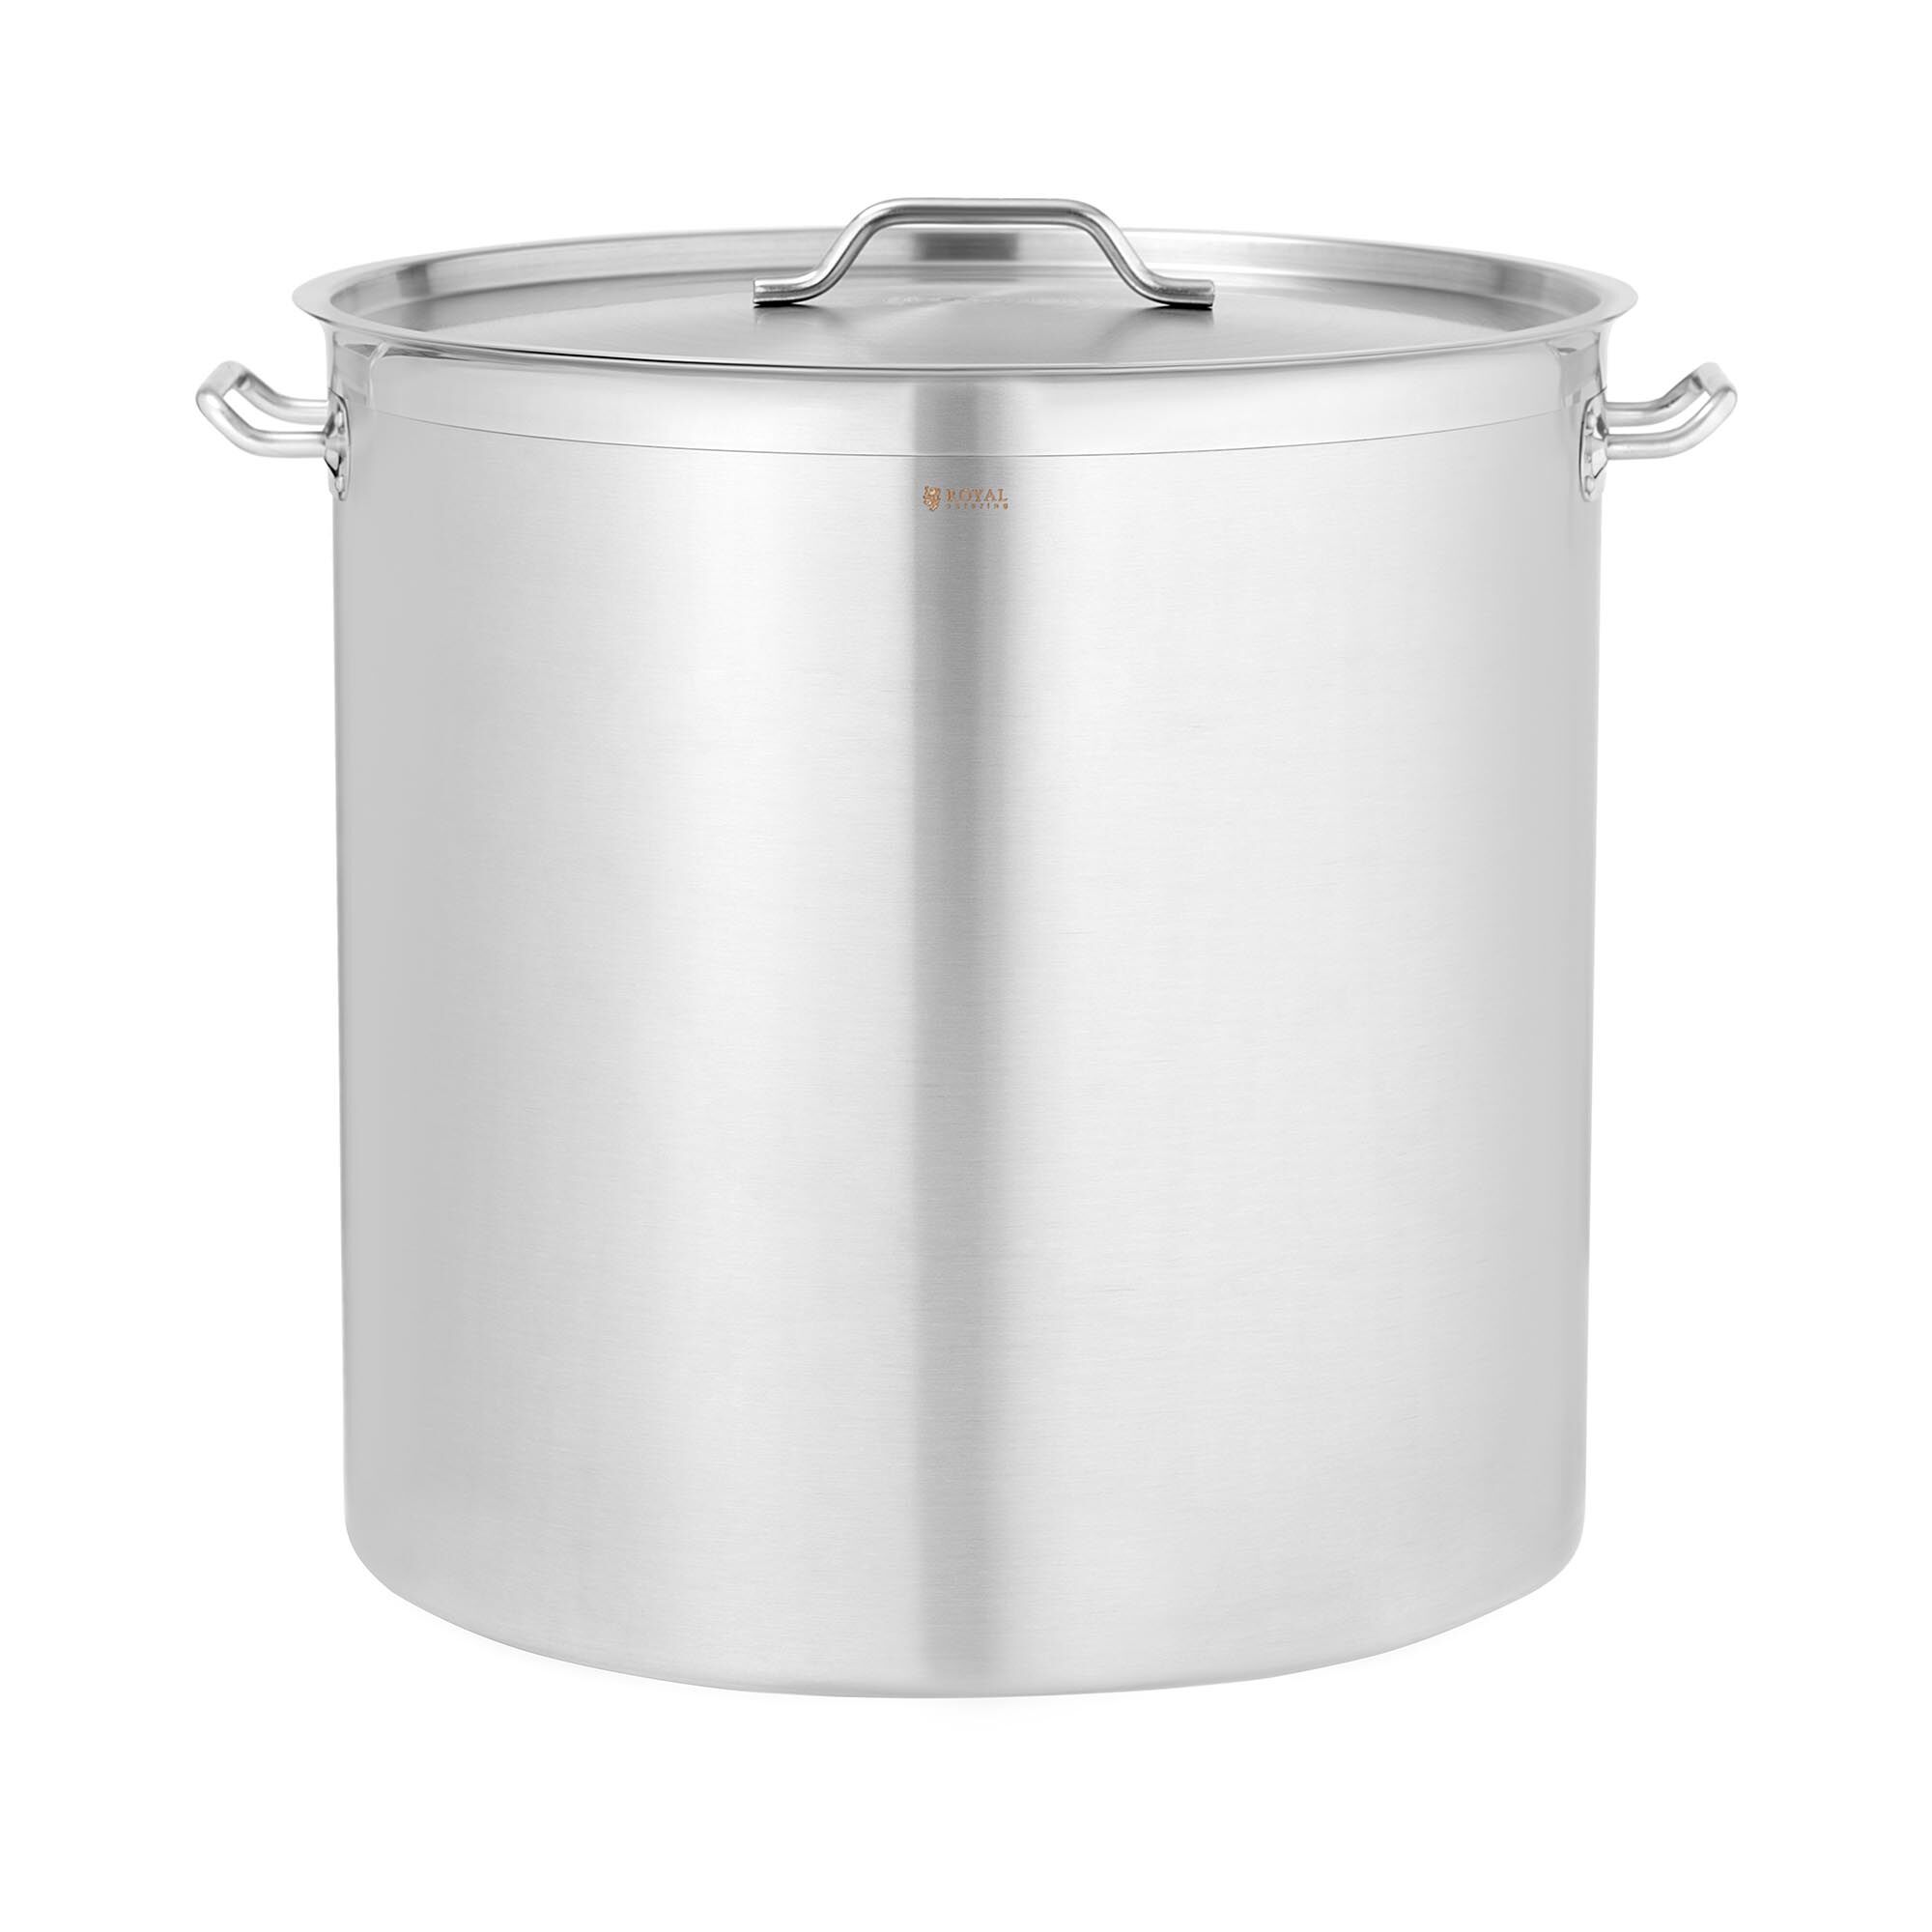 Royal Catering Induction Cooking Pot - 130 L - Royal Catering - 550 mm